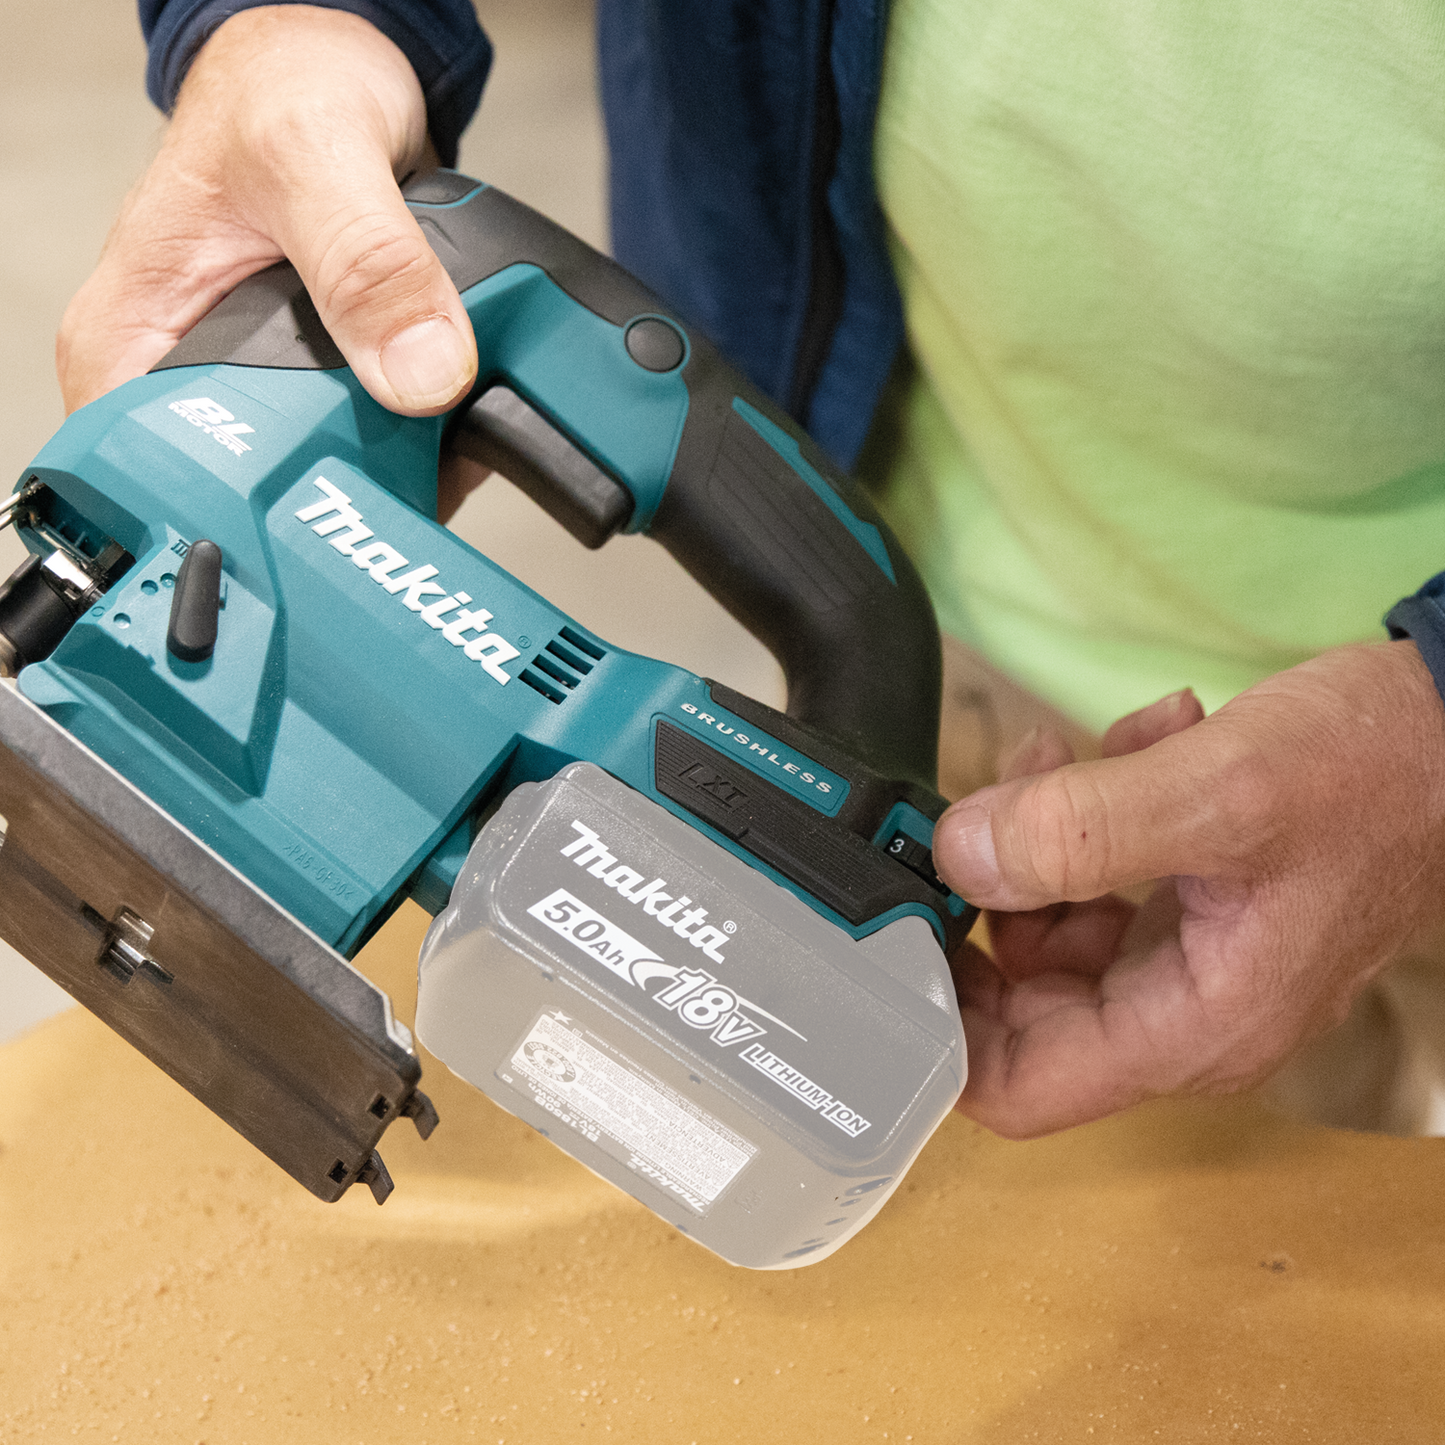 Makita 18V LXT Lithium-Ion Brushless Cordless Jig Saw (Tool Only)